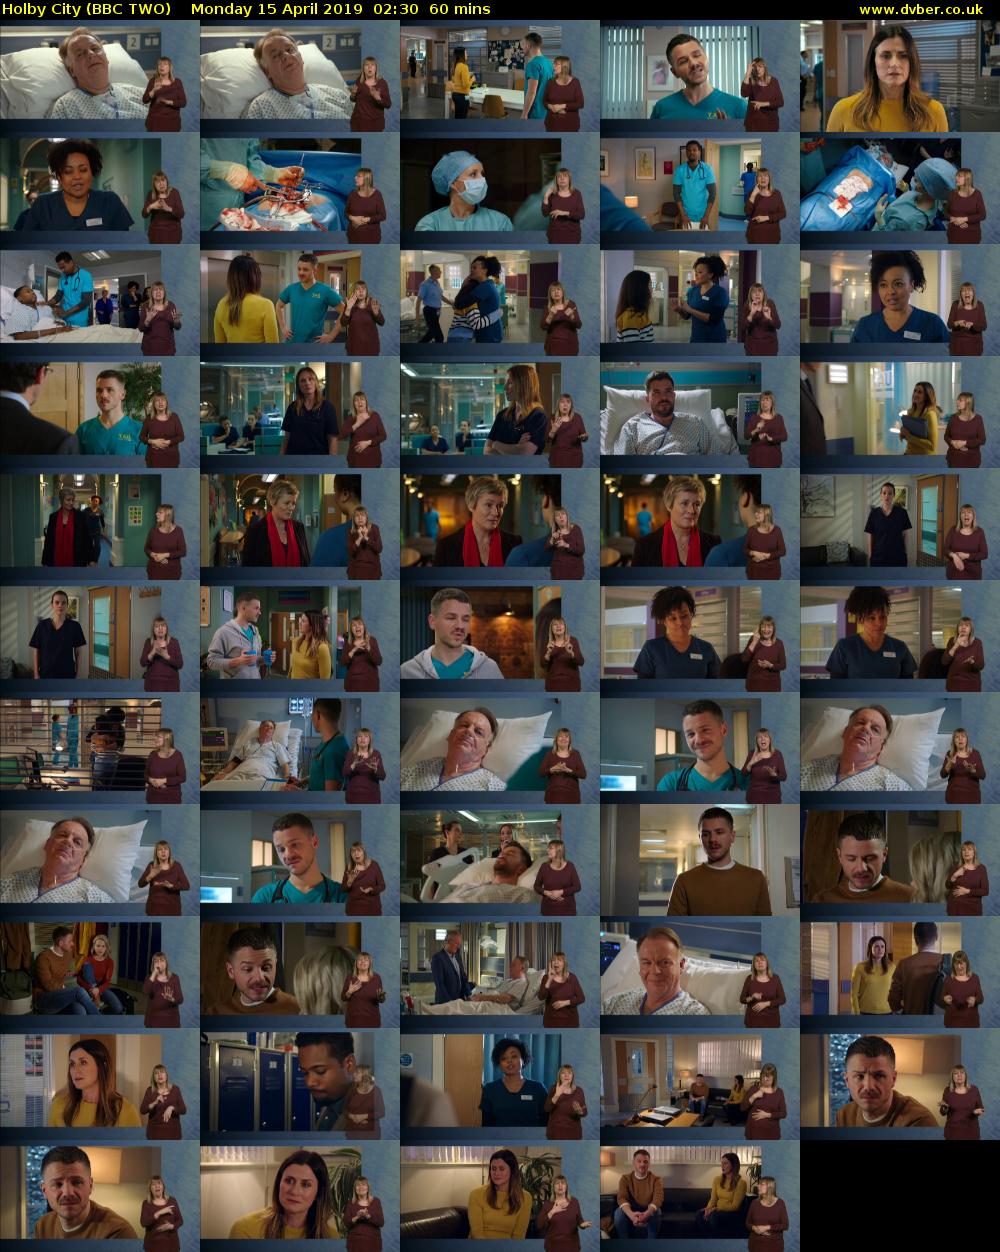 Holby City (BBC TWO) Monday 15 April 2019 02:30 - 03:30